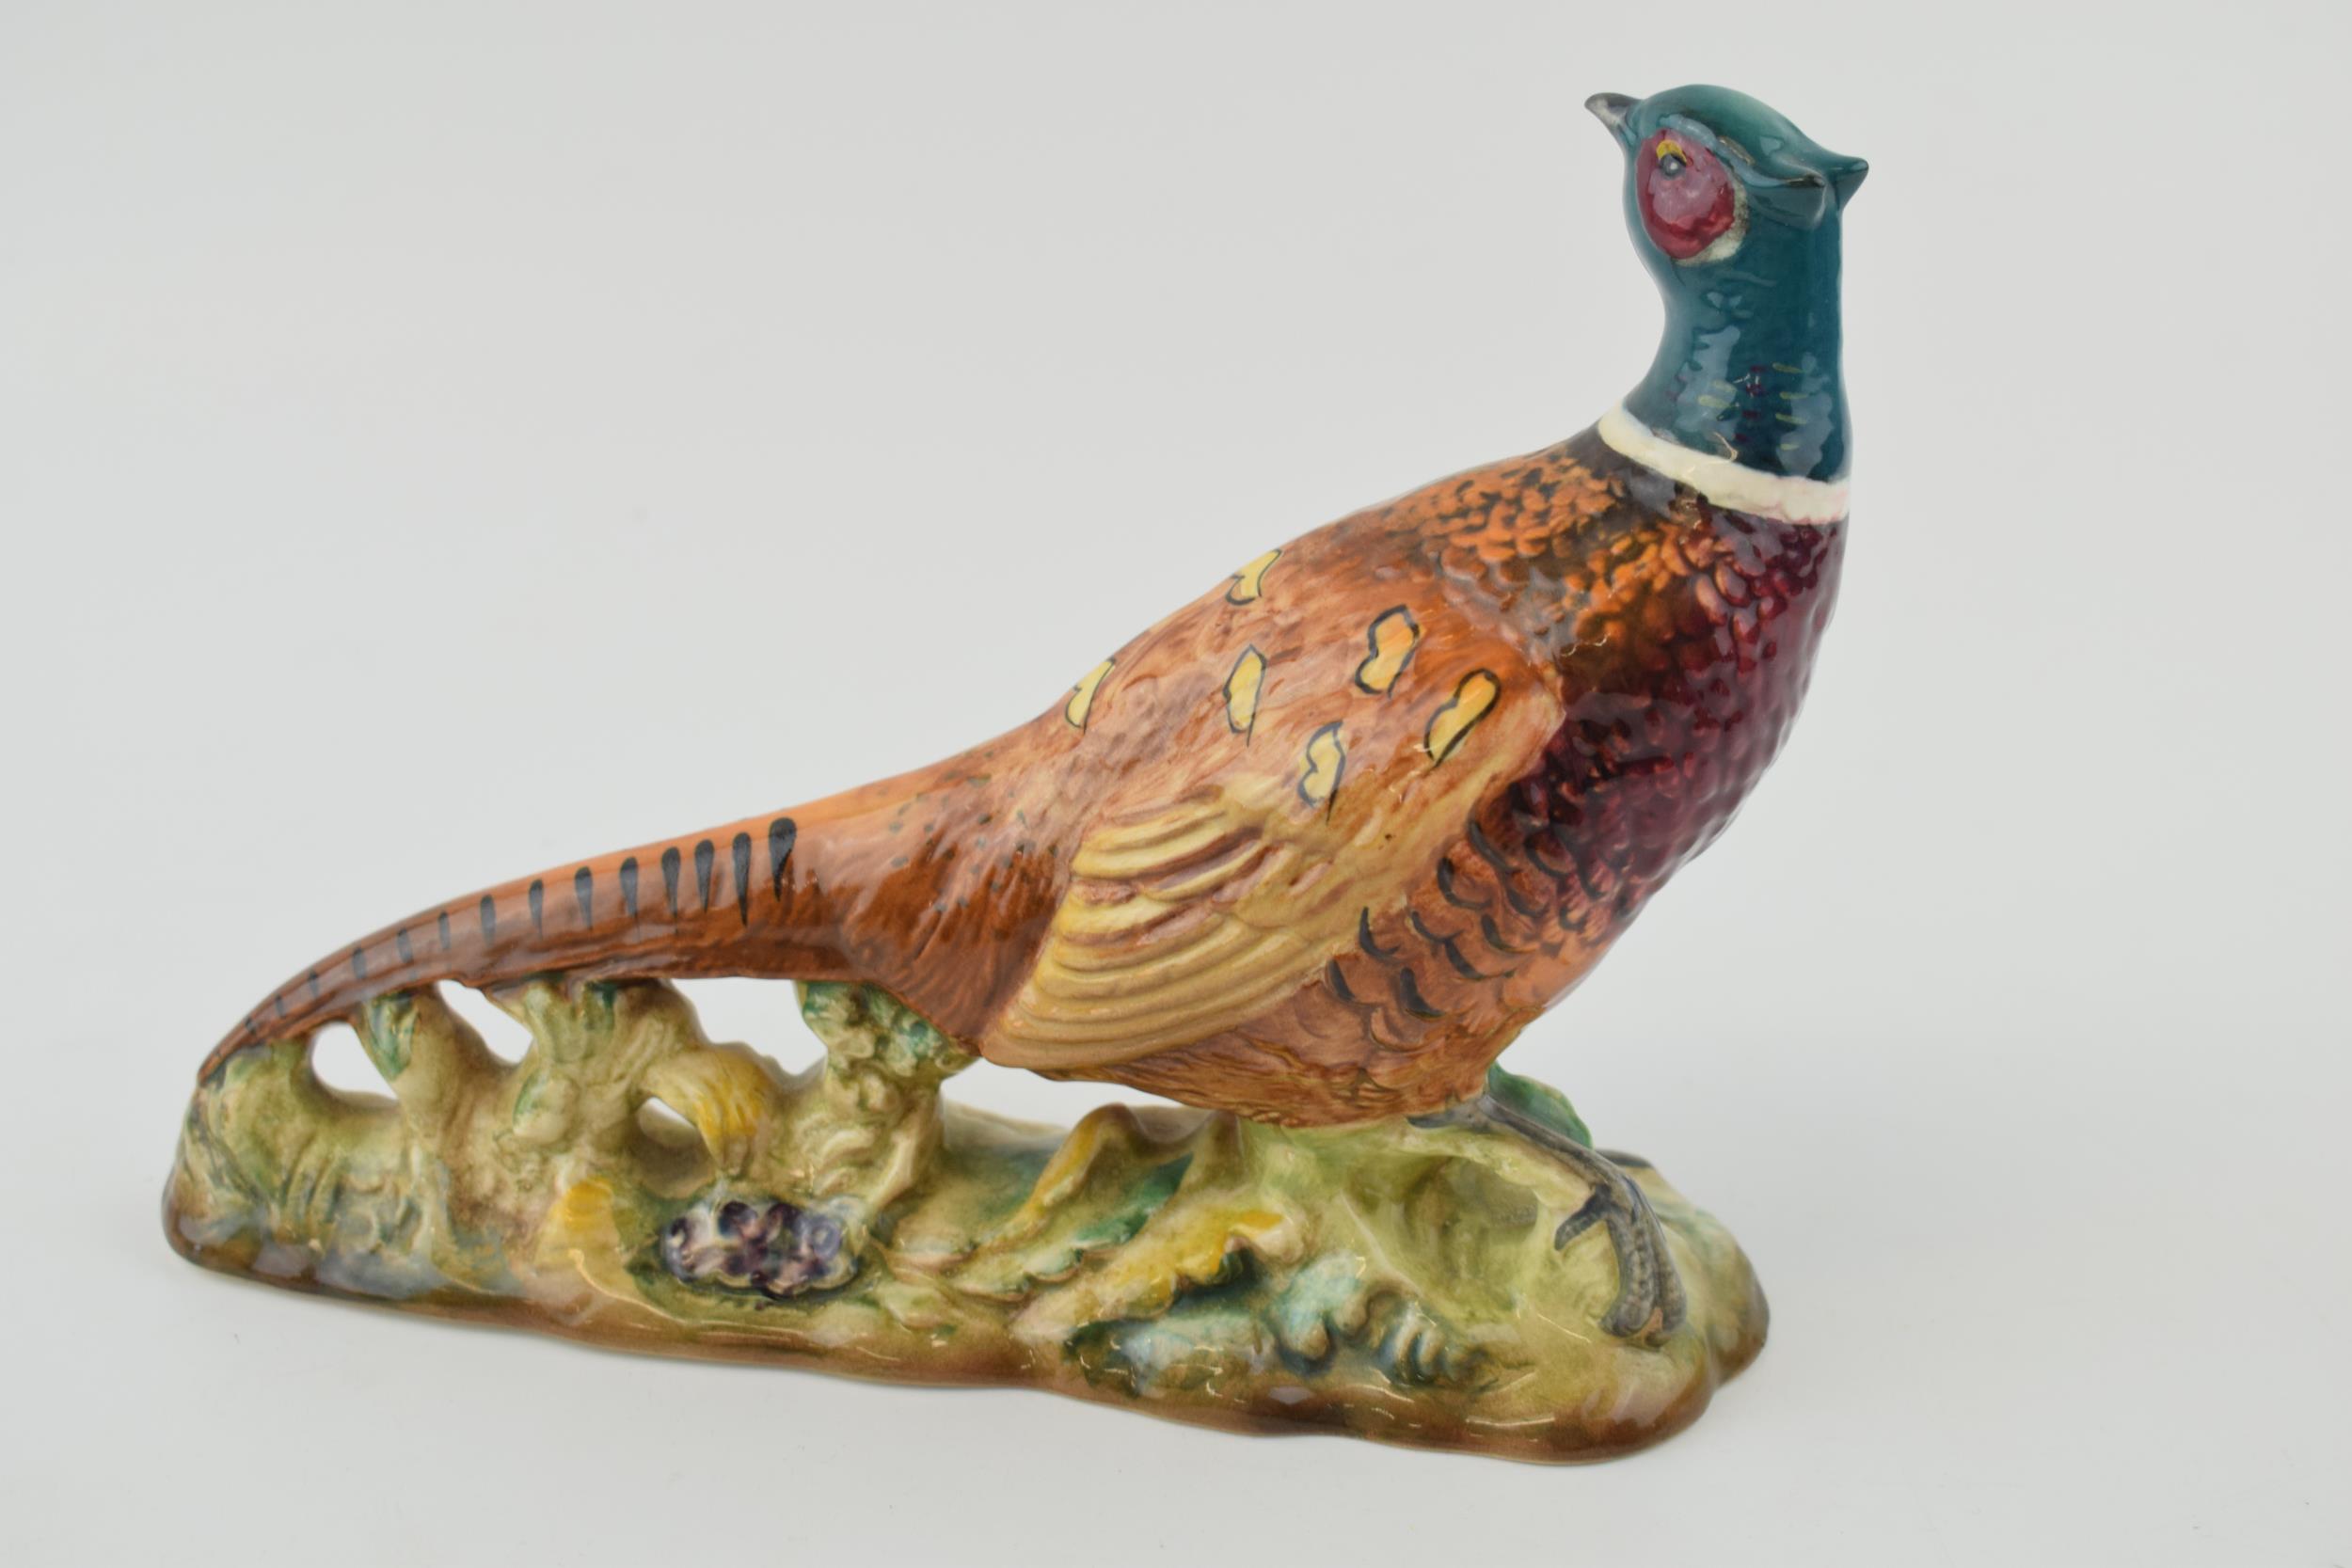 Beswick Pheasant 1226. In good condition with no obvious damage or restoration. - Image 2 of 3